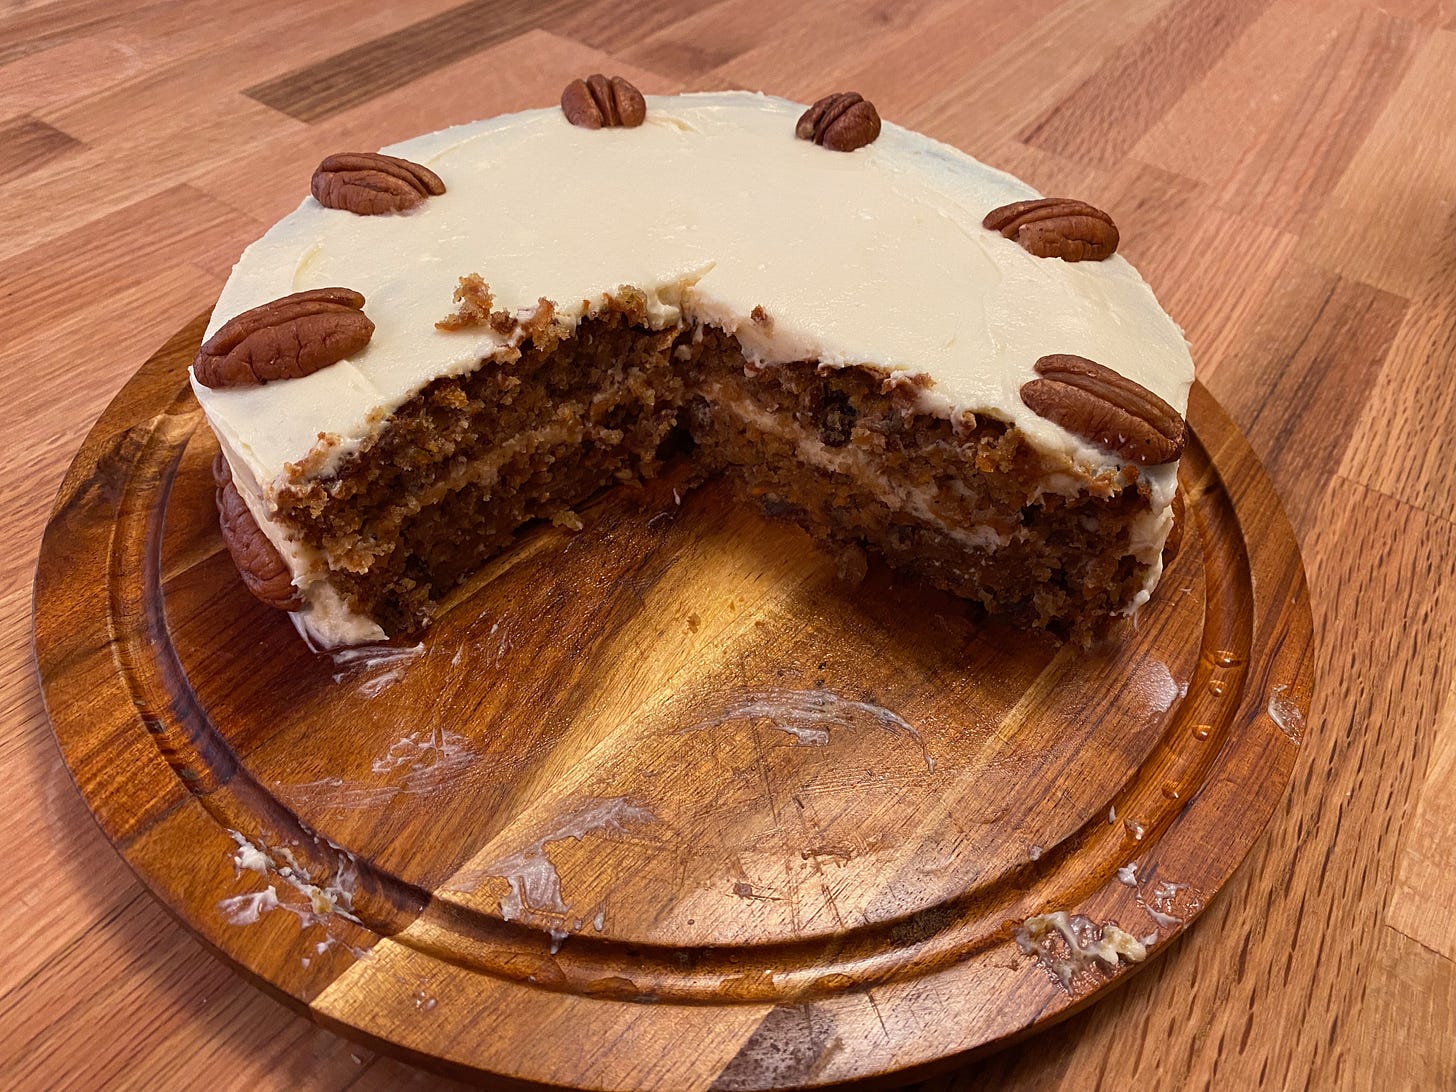 A two-layer carrot cake sits on a wooden platter. A large slice is cut out of it, revealing the layers inside. It’s frosted with white cream cheese frosting, and several pecan halves are arranged in a circle around the top.